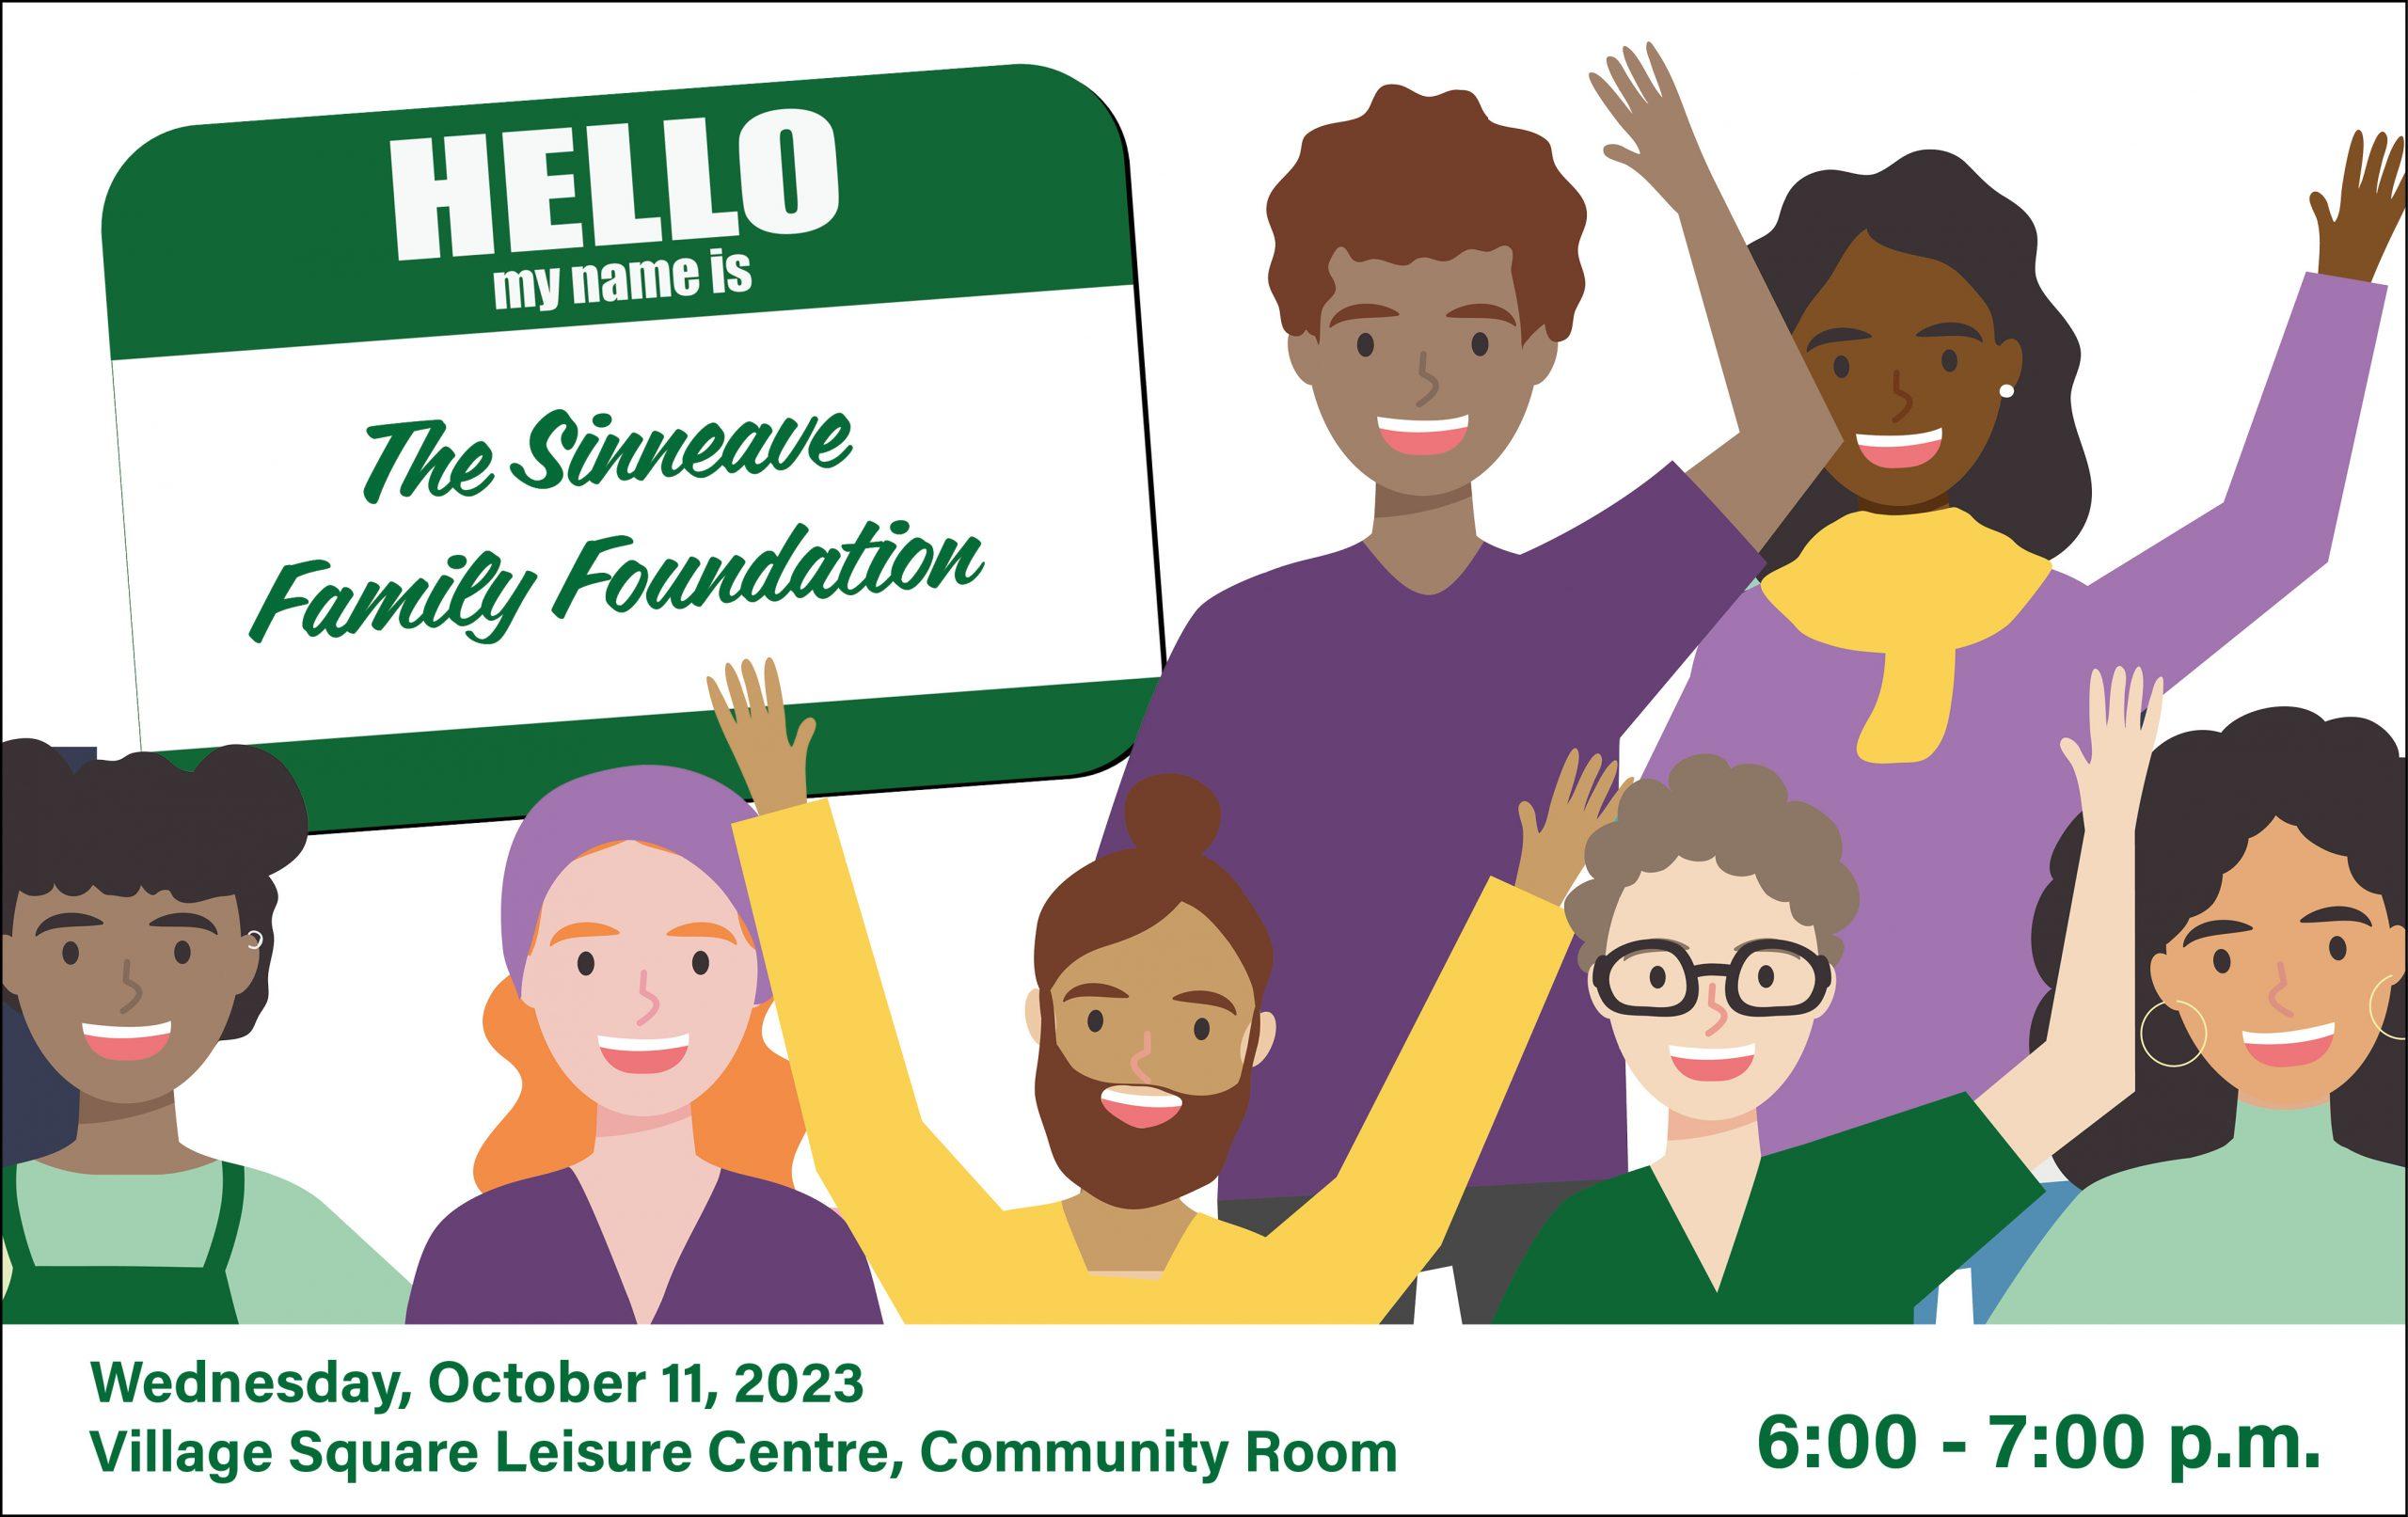 An illustration featuring several people of varying genders and ethnicities are waving and making welcoming gestures. There is a nametag in the top left corner that says, Hello my name is the sinneave family foundation